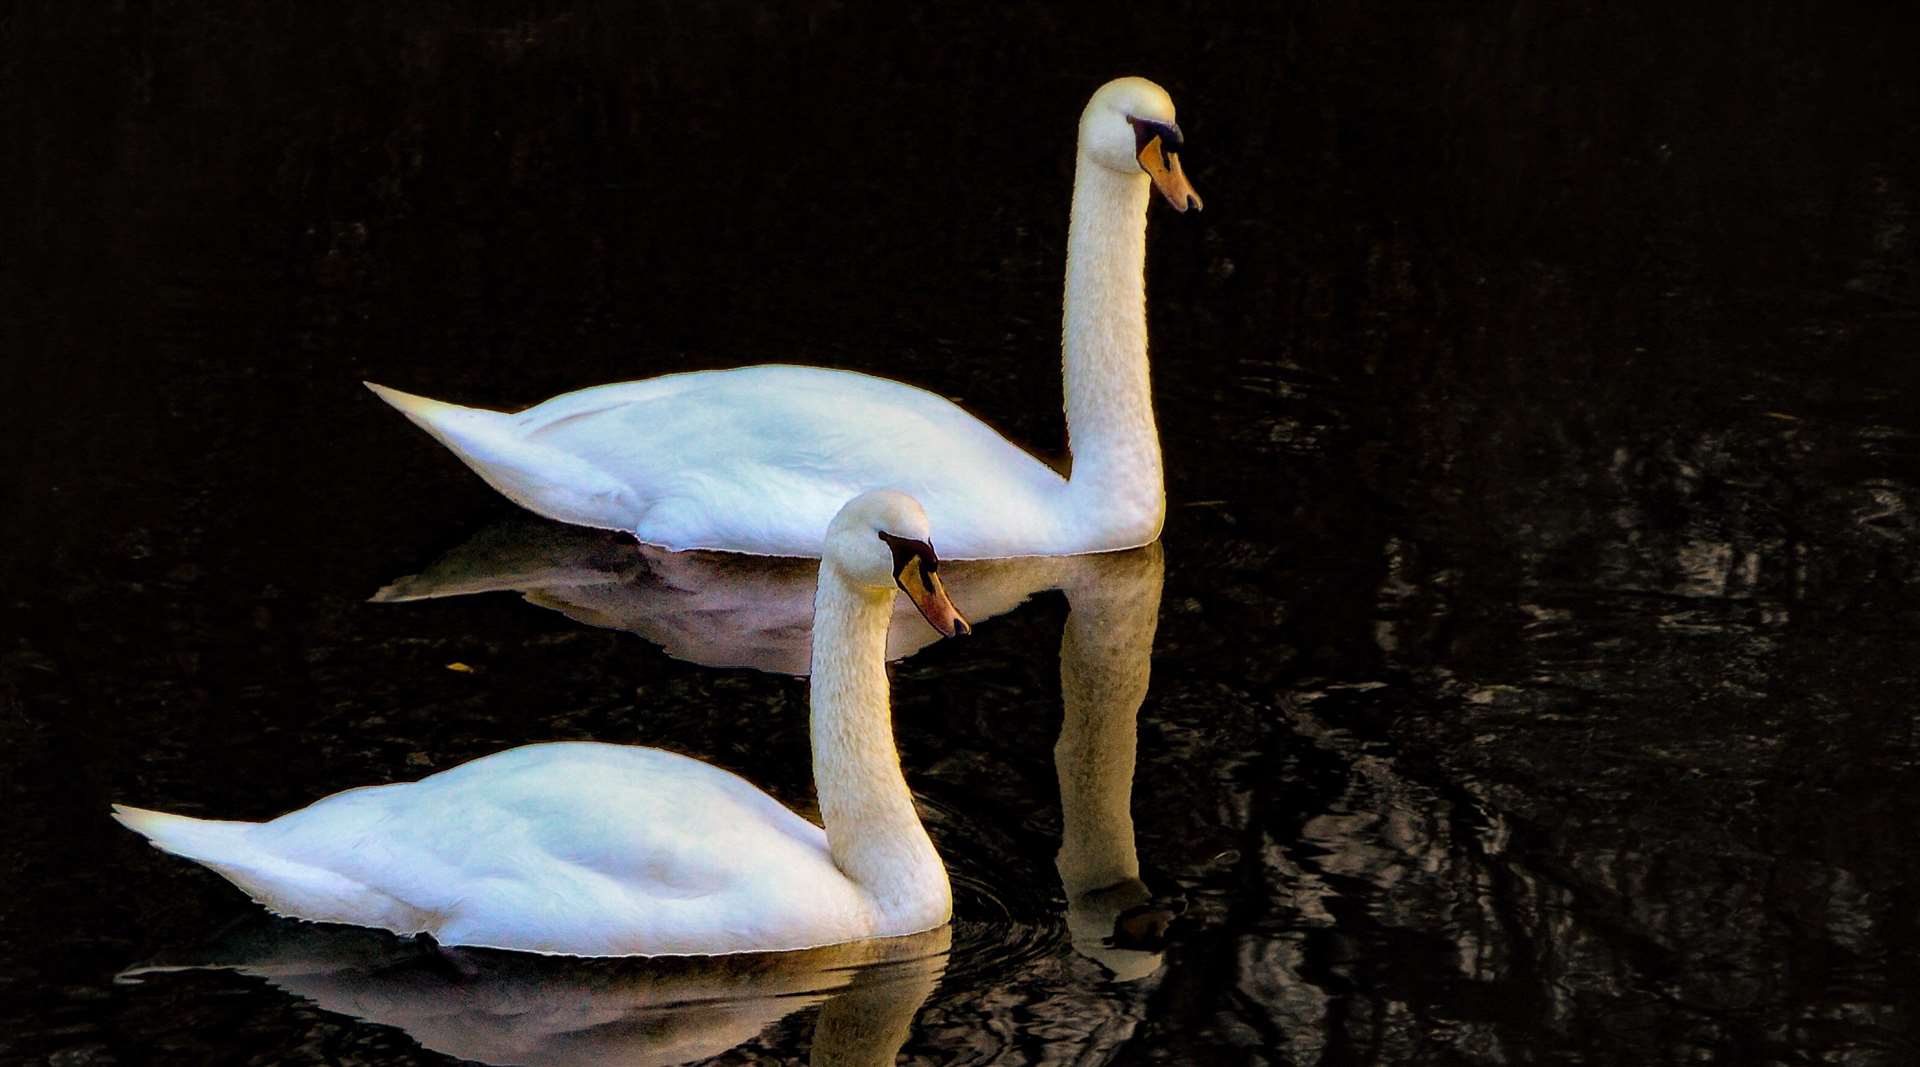 Swans are among the birds that must be reported if found dead